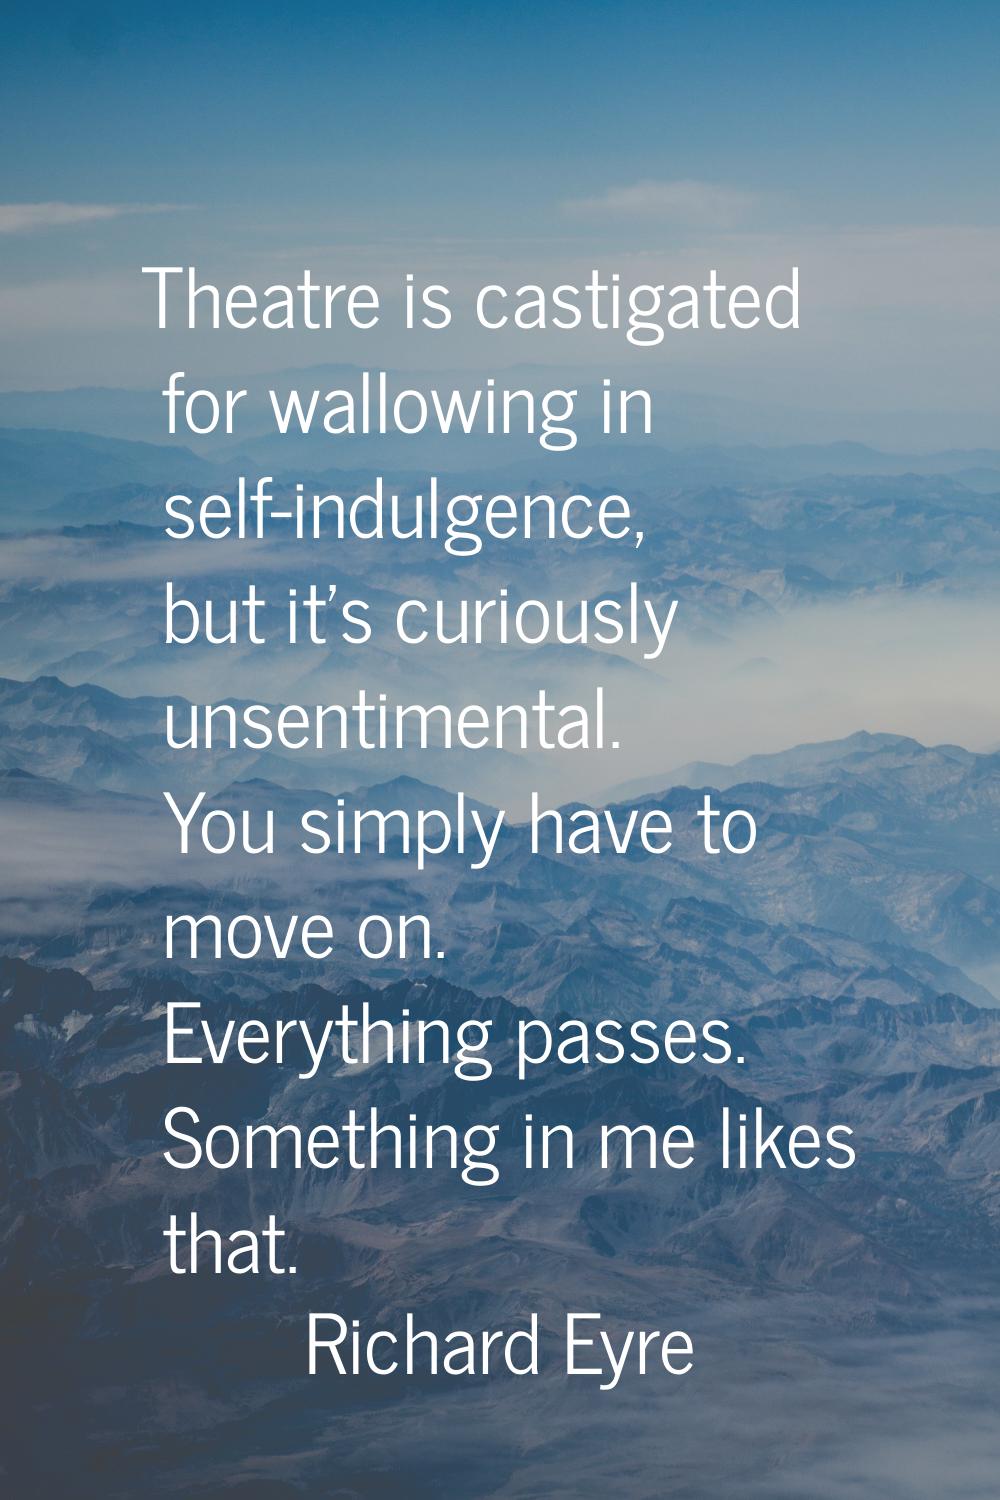 Theatre is castigated for wallowing in self-indulgence, but it's curiously unsentimental. You simpl